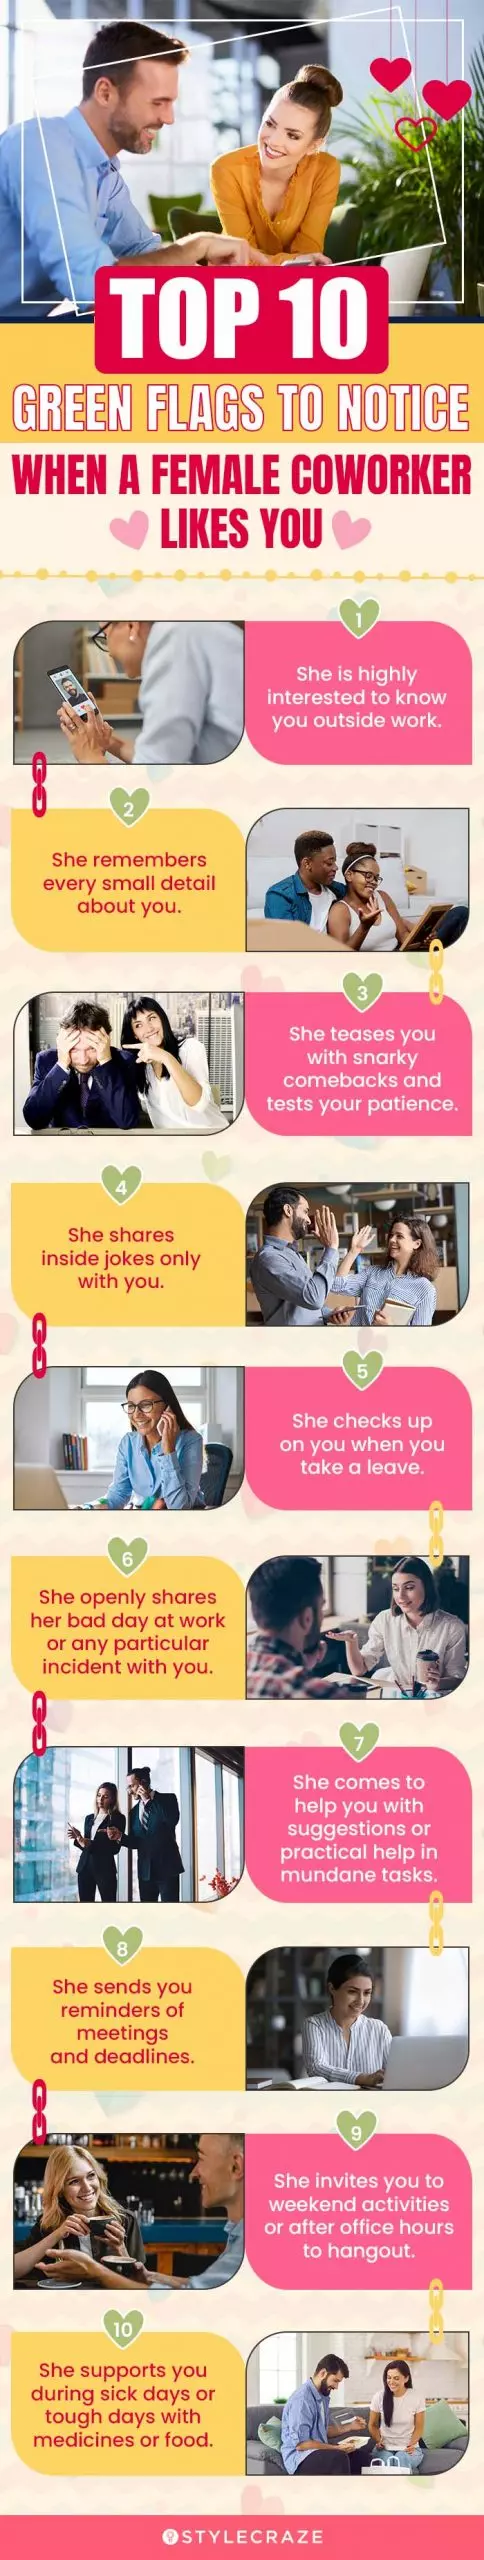 top 10 green flags to notice when a female coworker likes you (infographic)